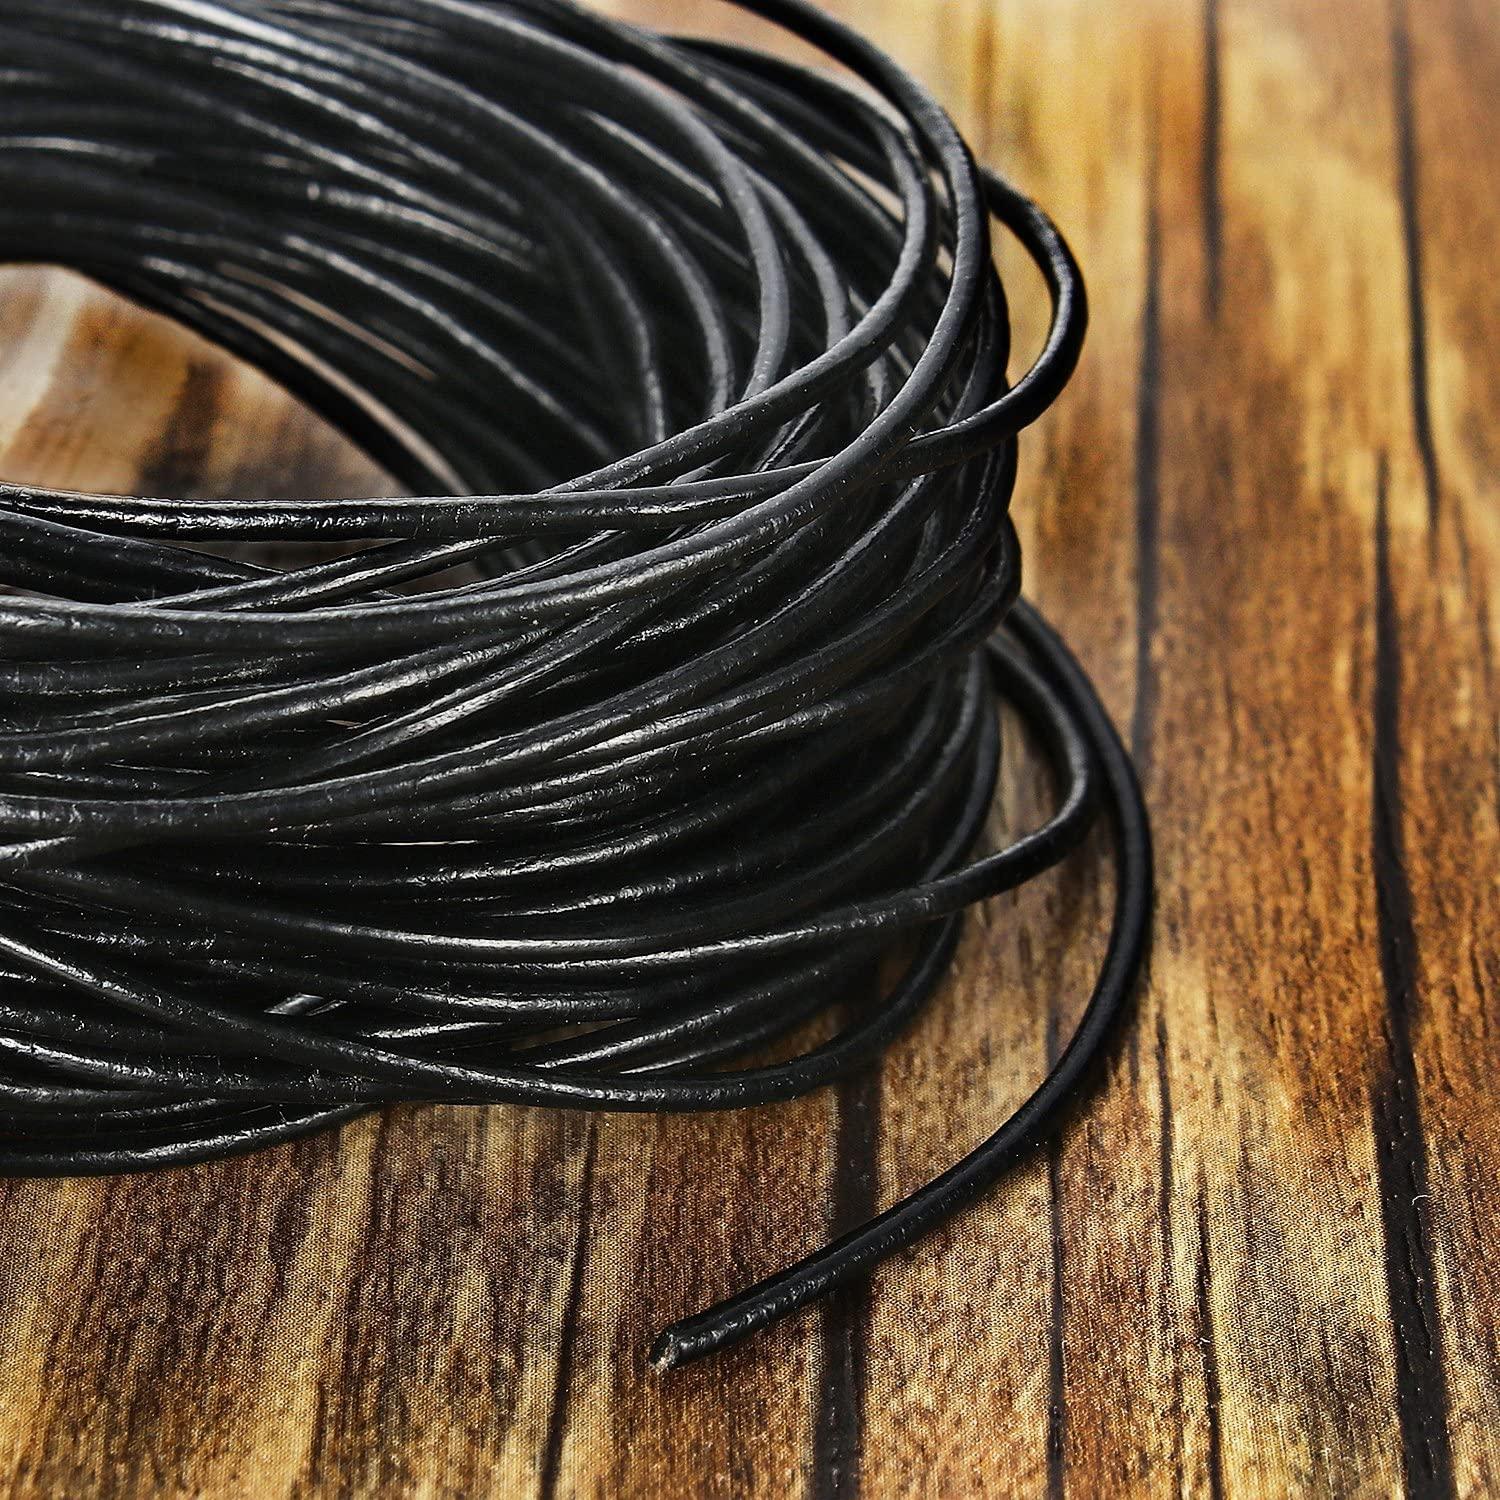 10M 1.5mm Round Real Leather Jewelry Cord Brown Beading Cord